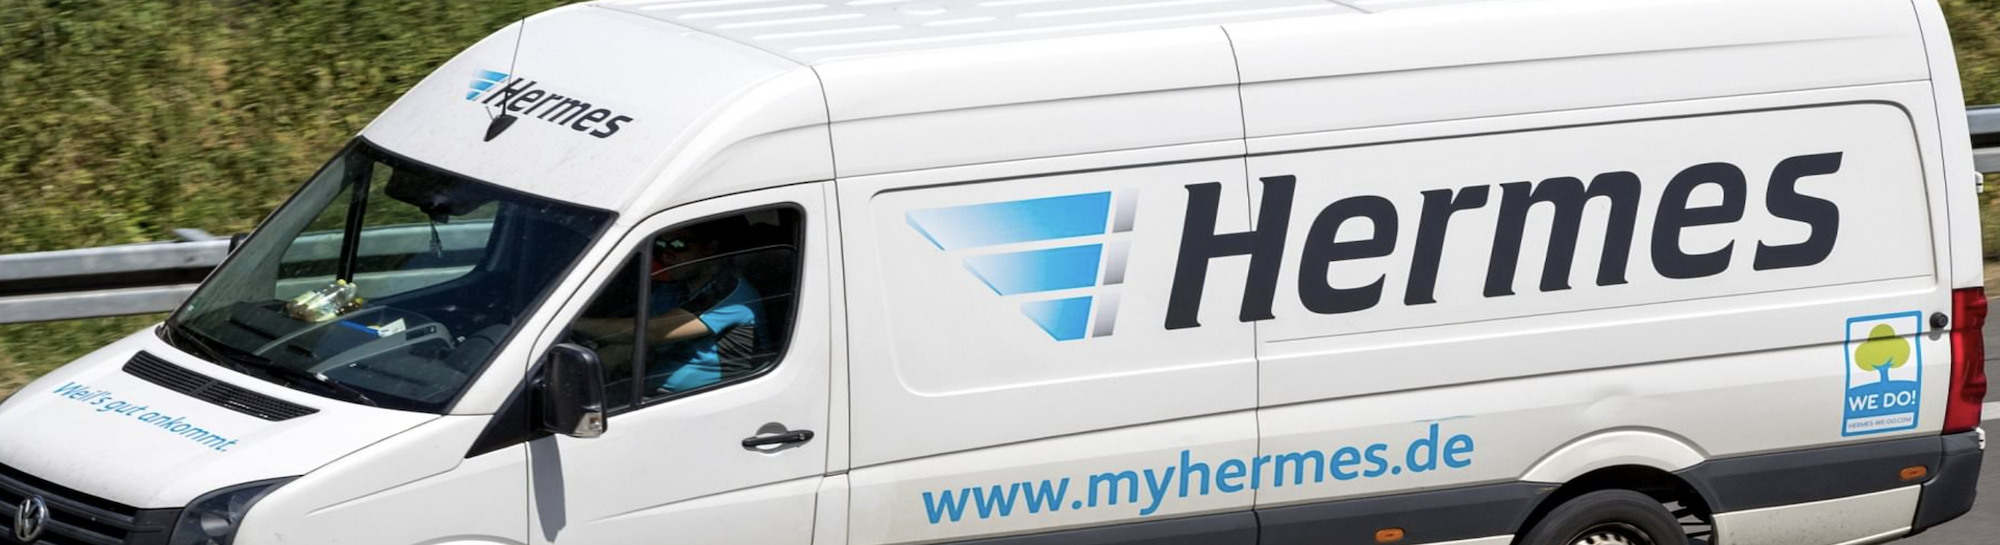 Shipping with Hermes: the complete guide for UK e-commerce retailers